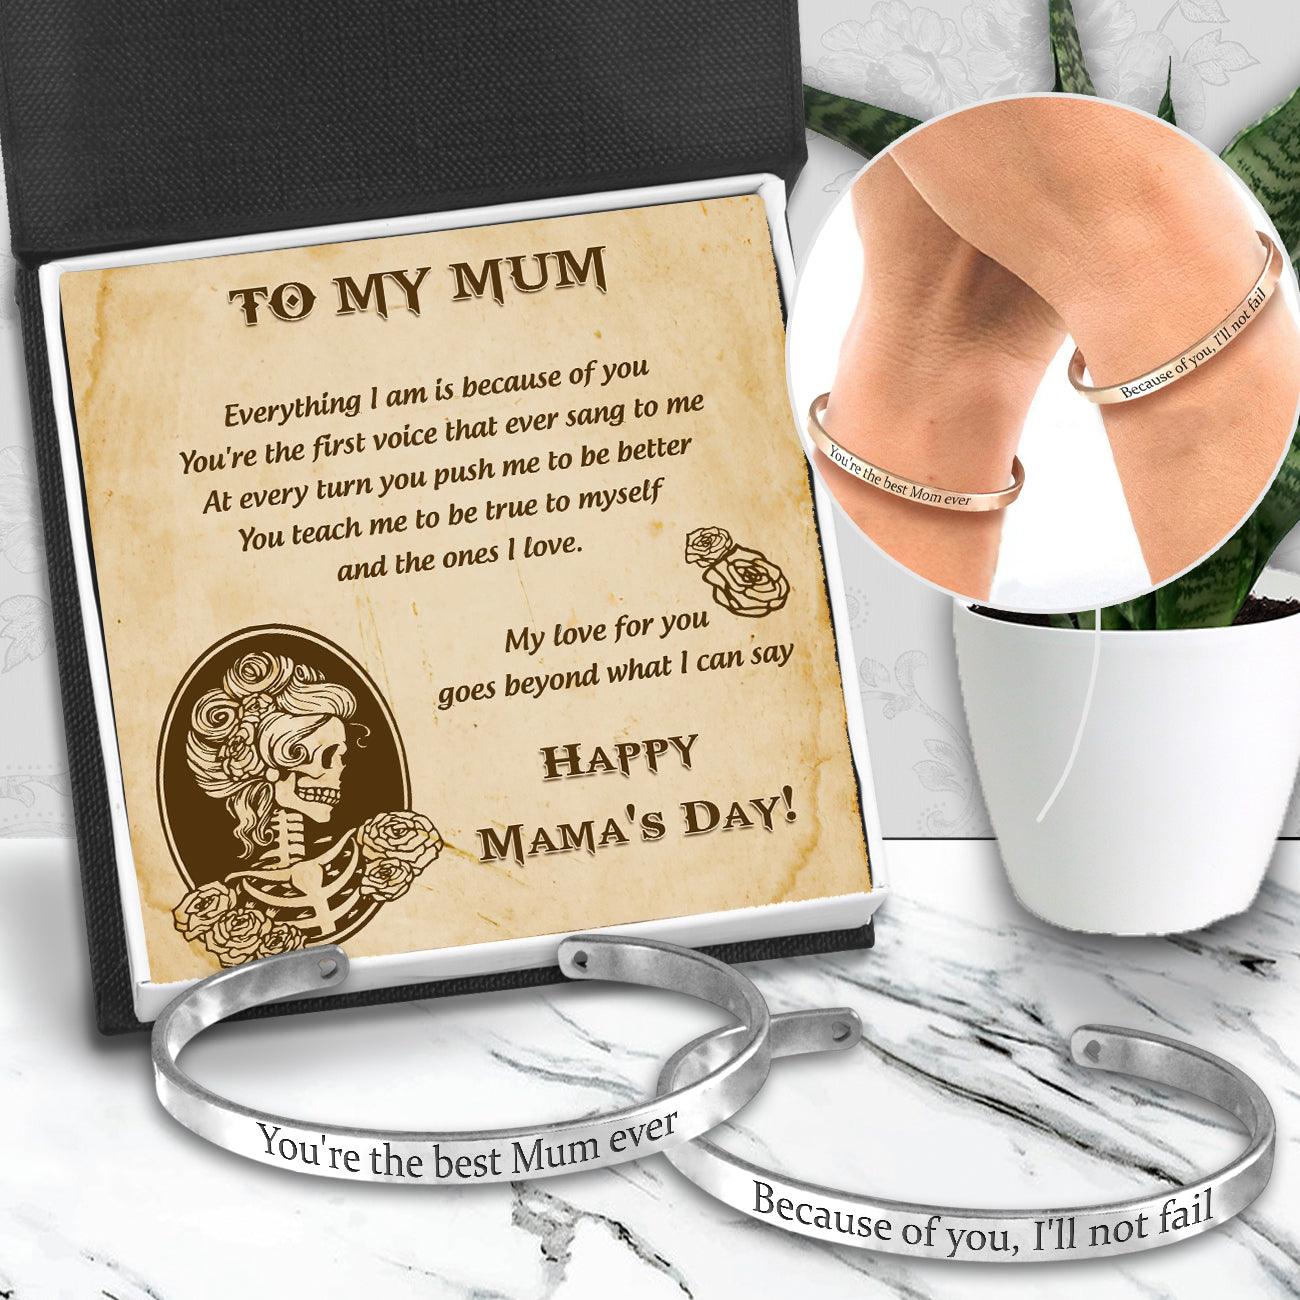 Mum & Daughter Bracelets - Skull - To My Mum - My Love For You Goes Beyond What I Can Say - Augbt19009 - Gifts Holder